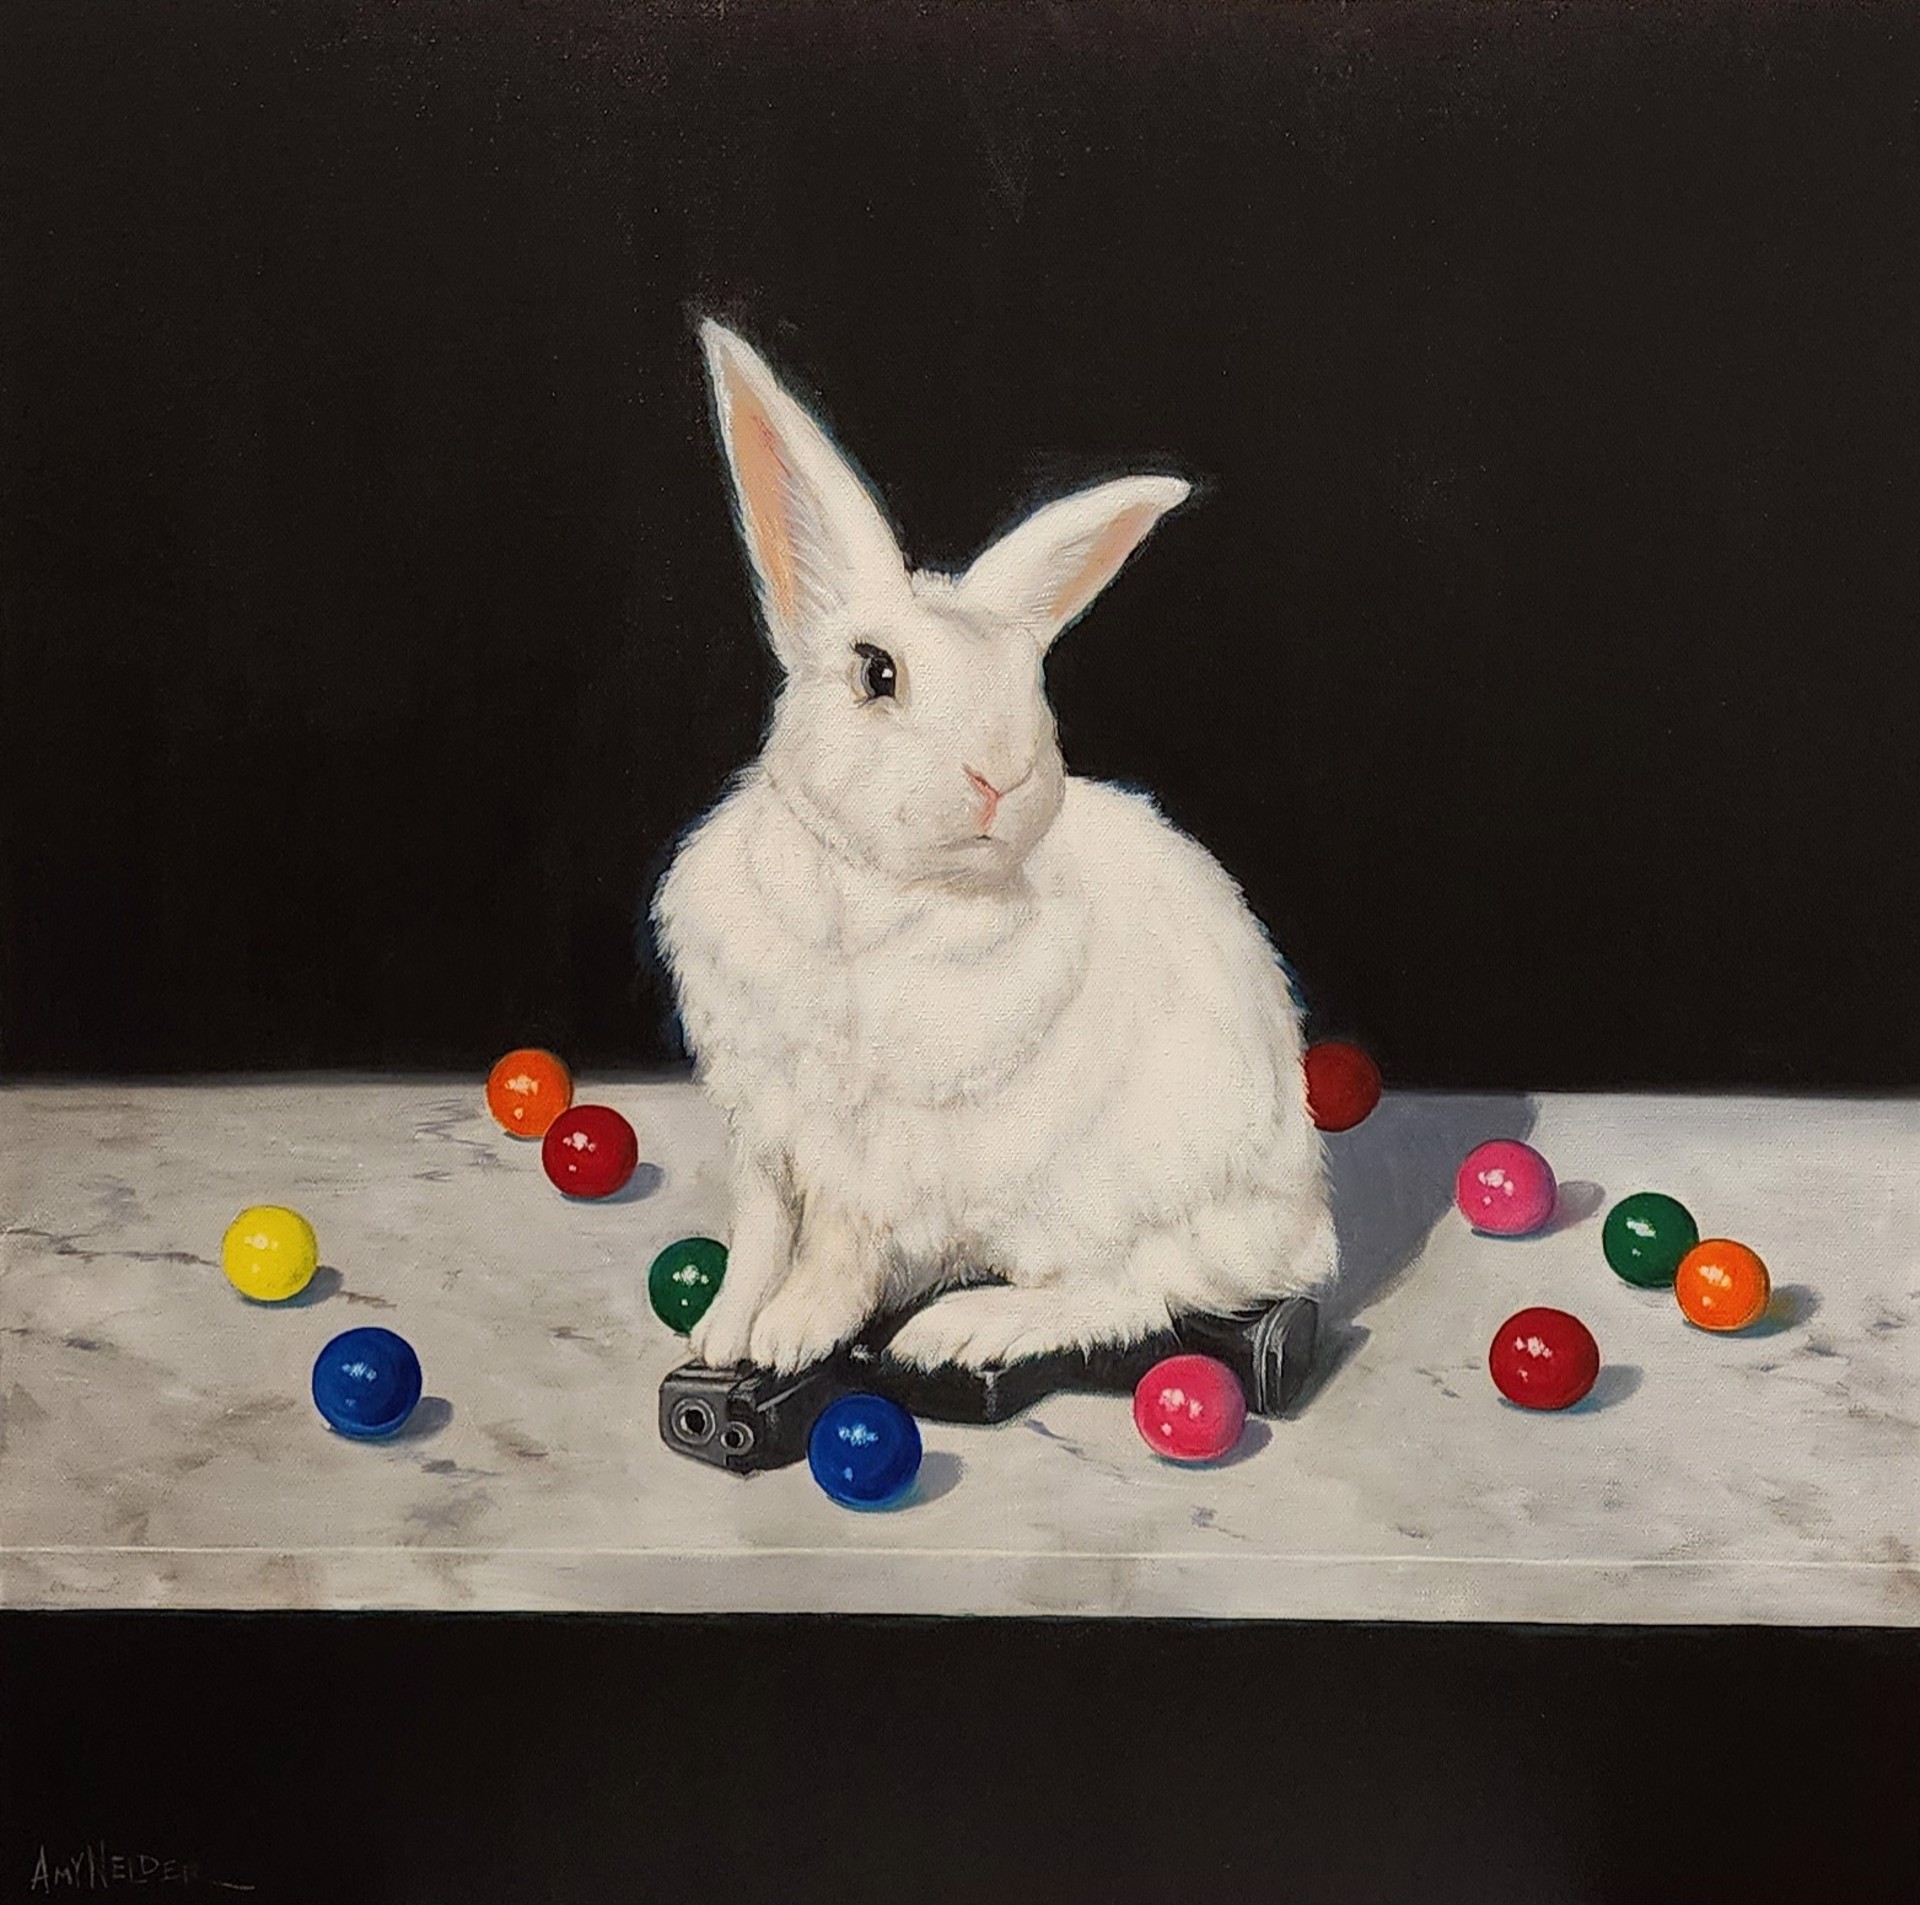 Bunnies and Guns #9 (SOLD) by Amy Nelder